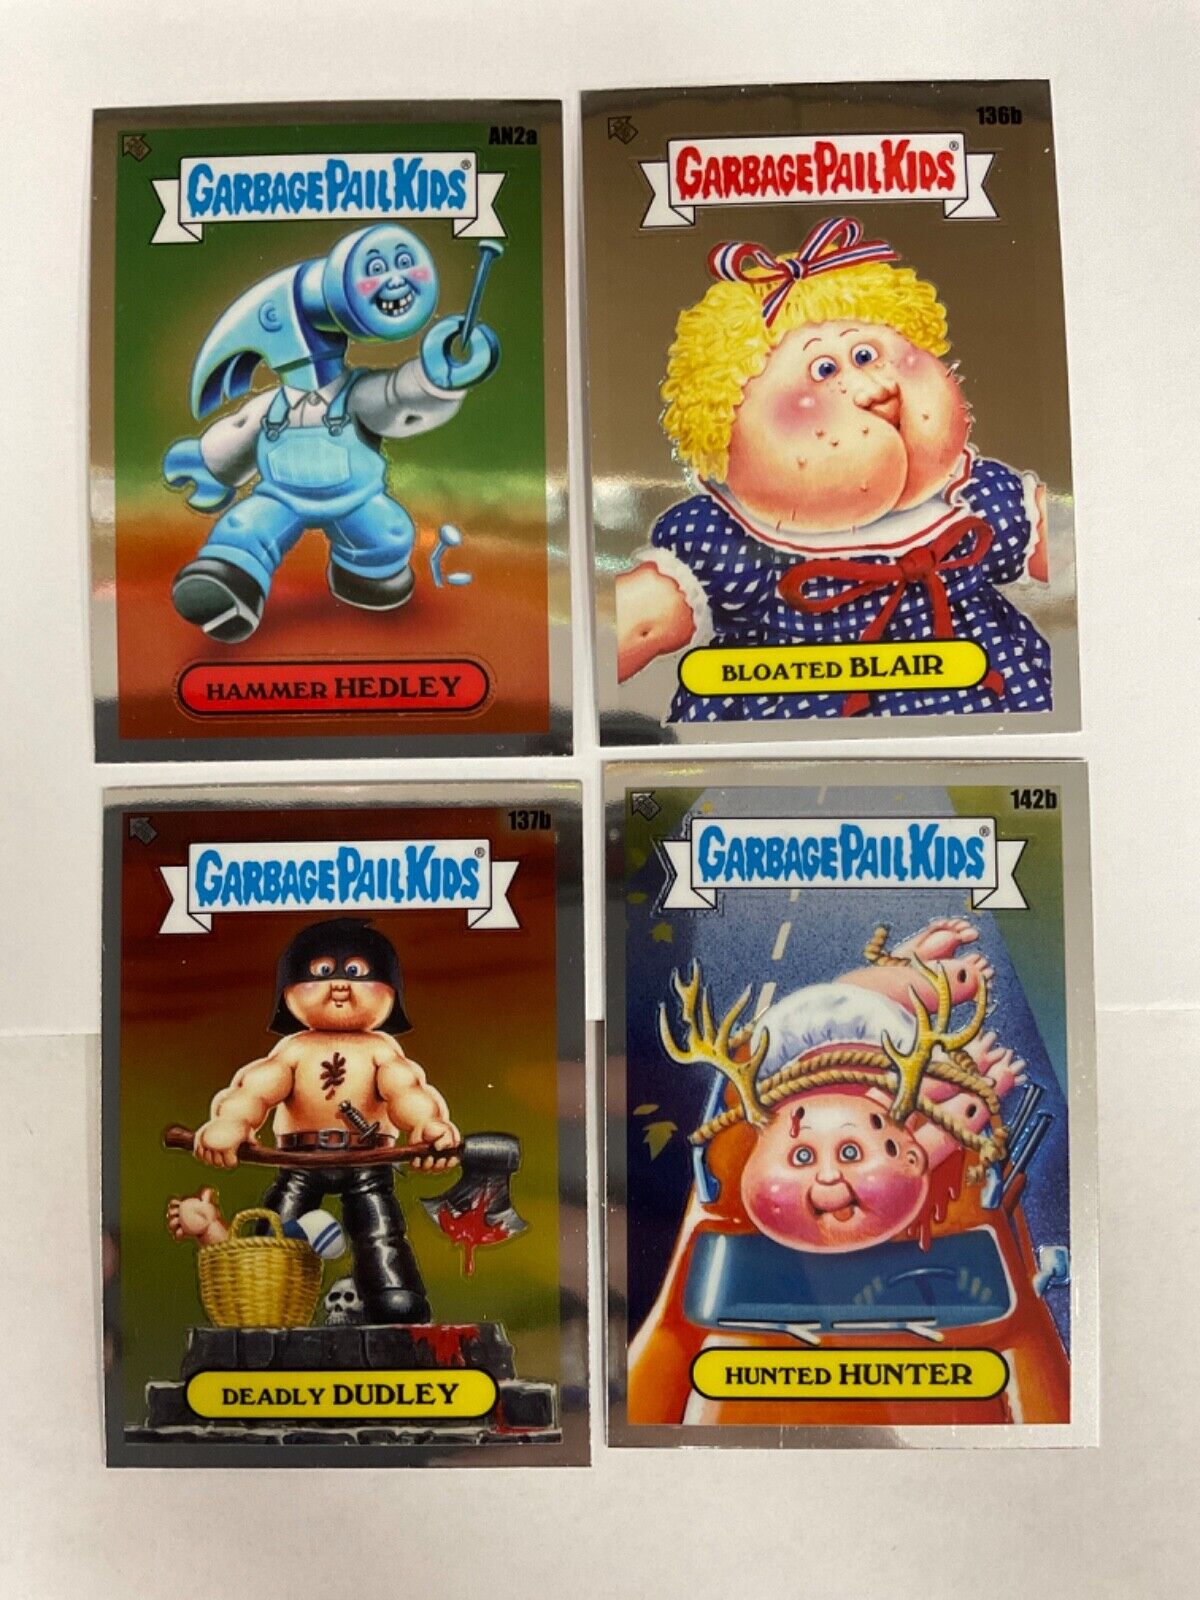 2021 Topps Garbage Pail Kids Chrome Cards Lot of 4